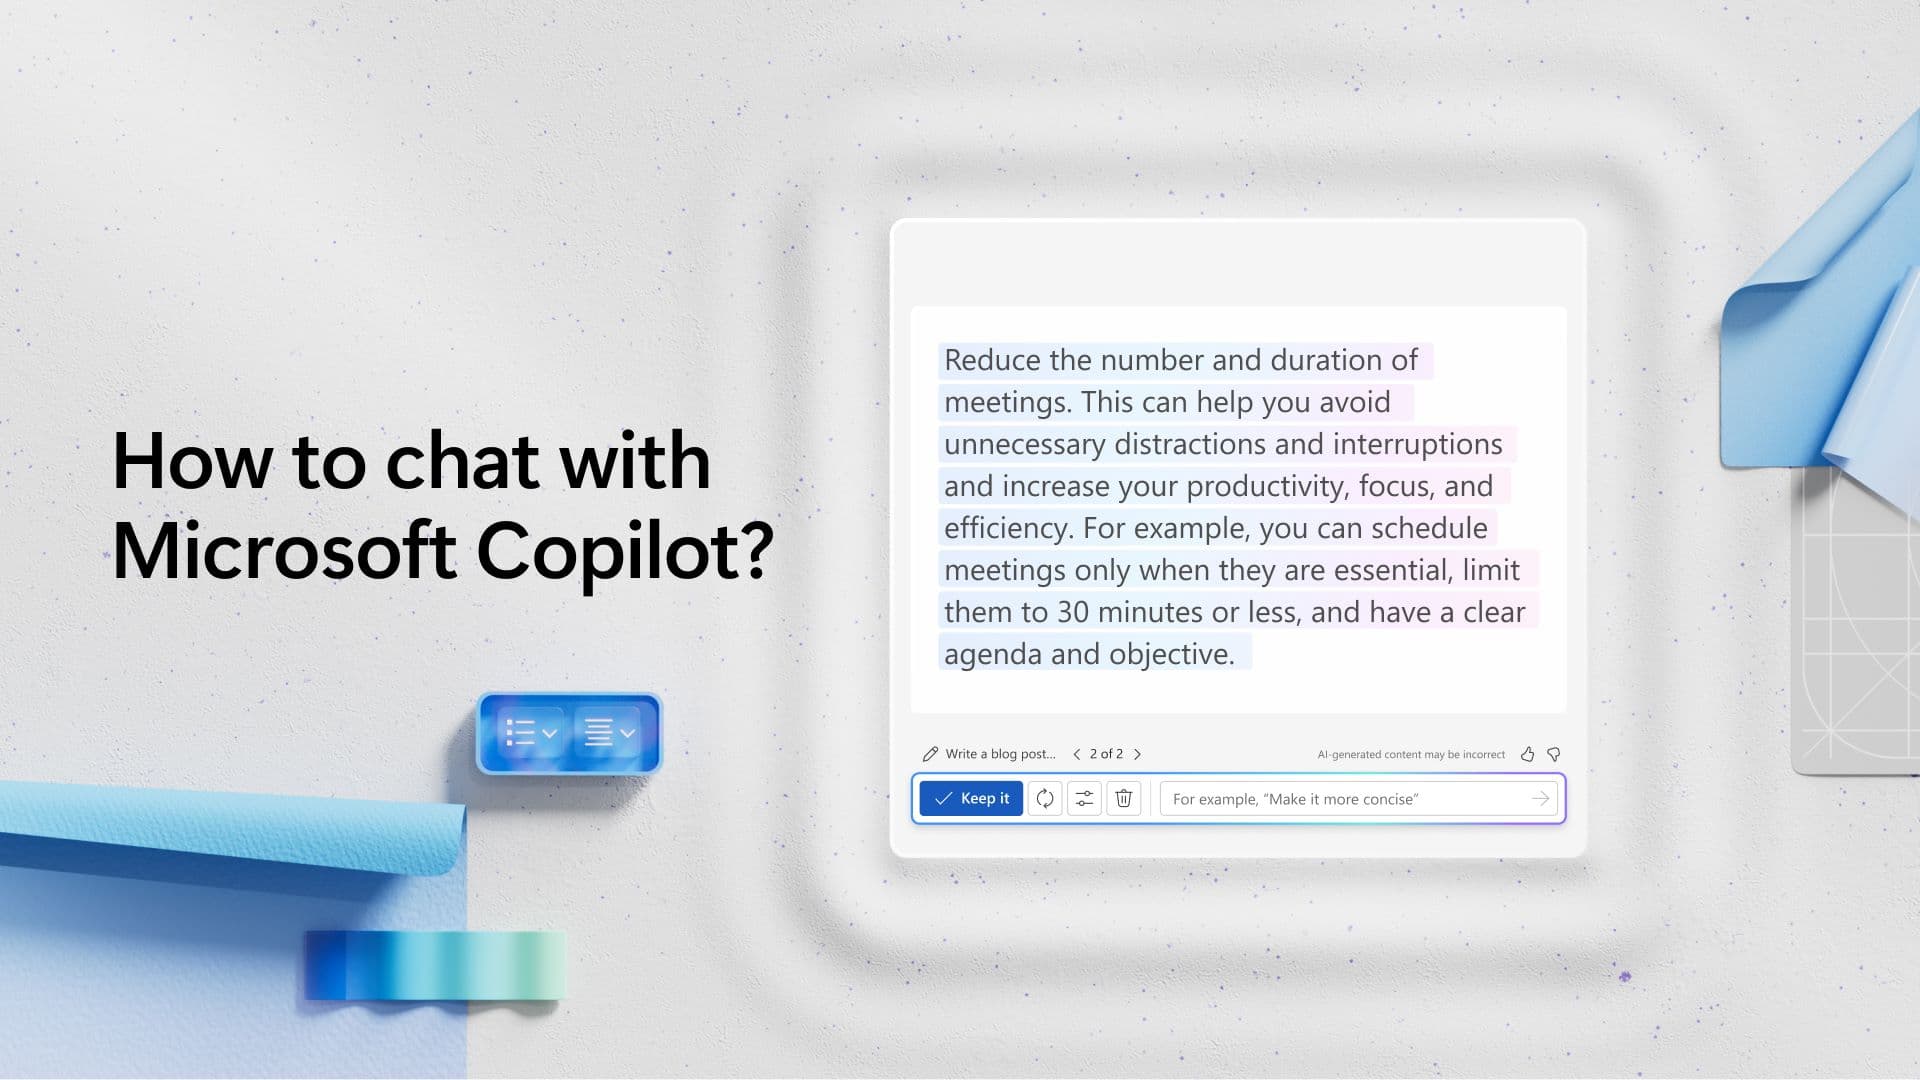 Video: How to chat with Microsoft Copilot